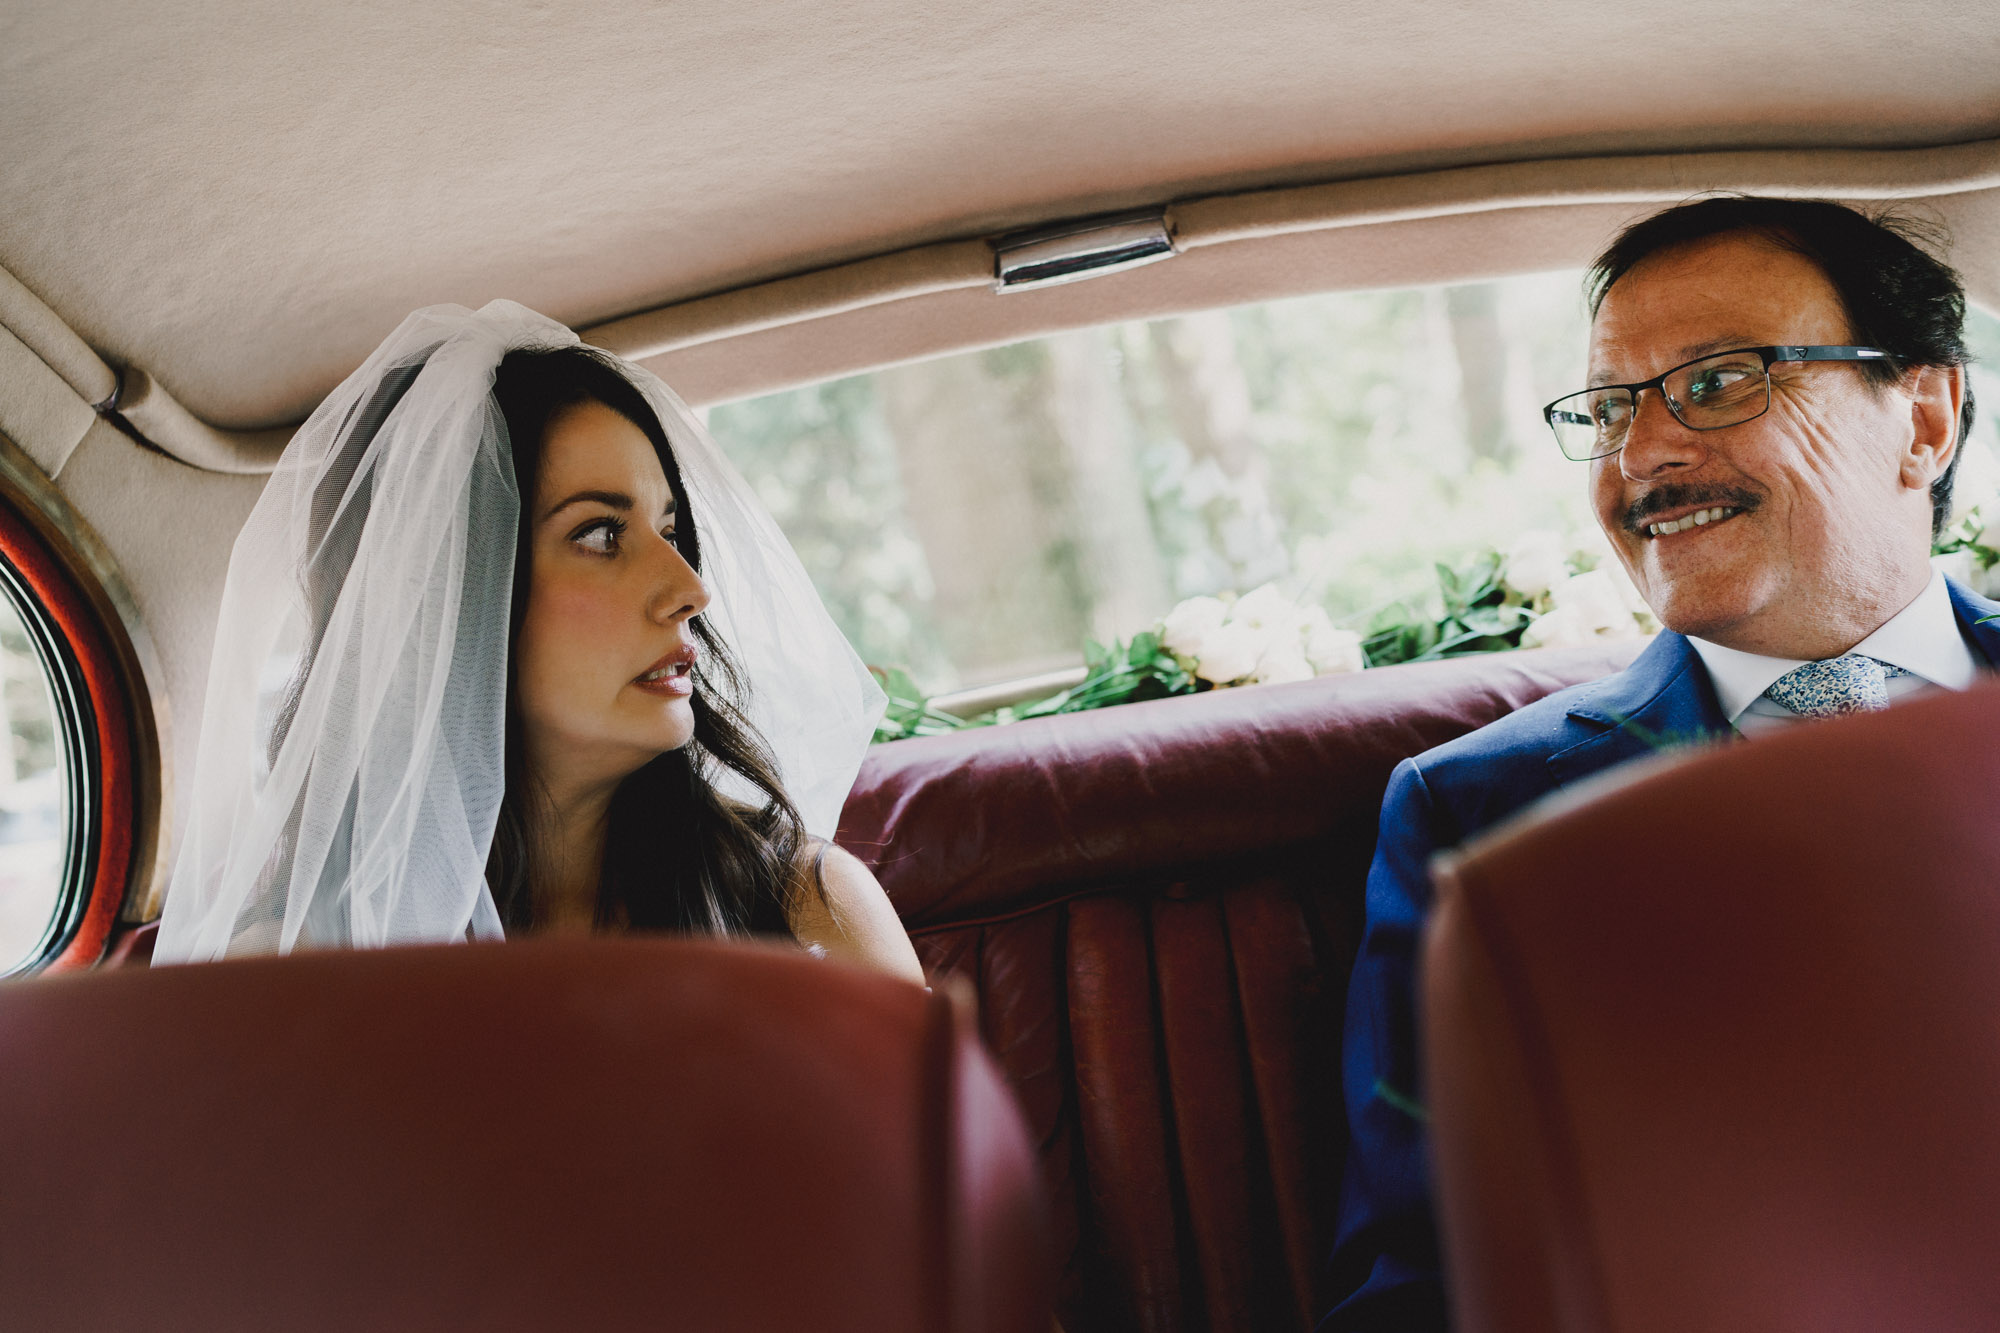 documentary image of bride looking at dad in a worried manor in the car on the way to the ceremony